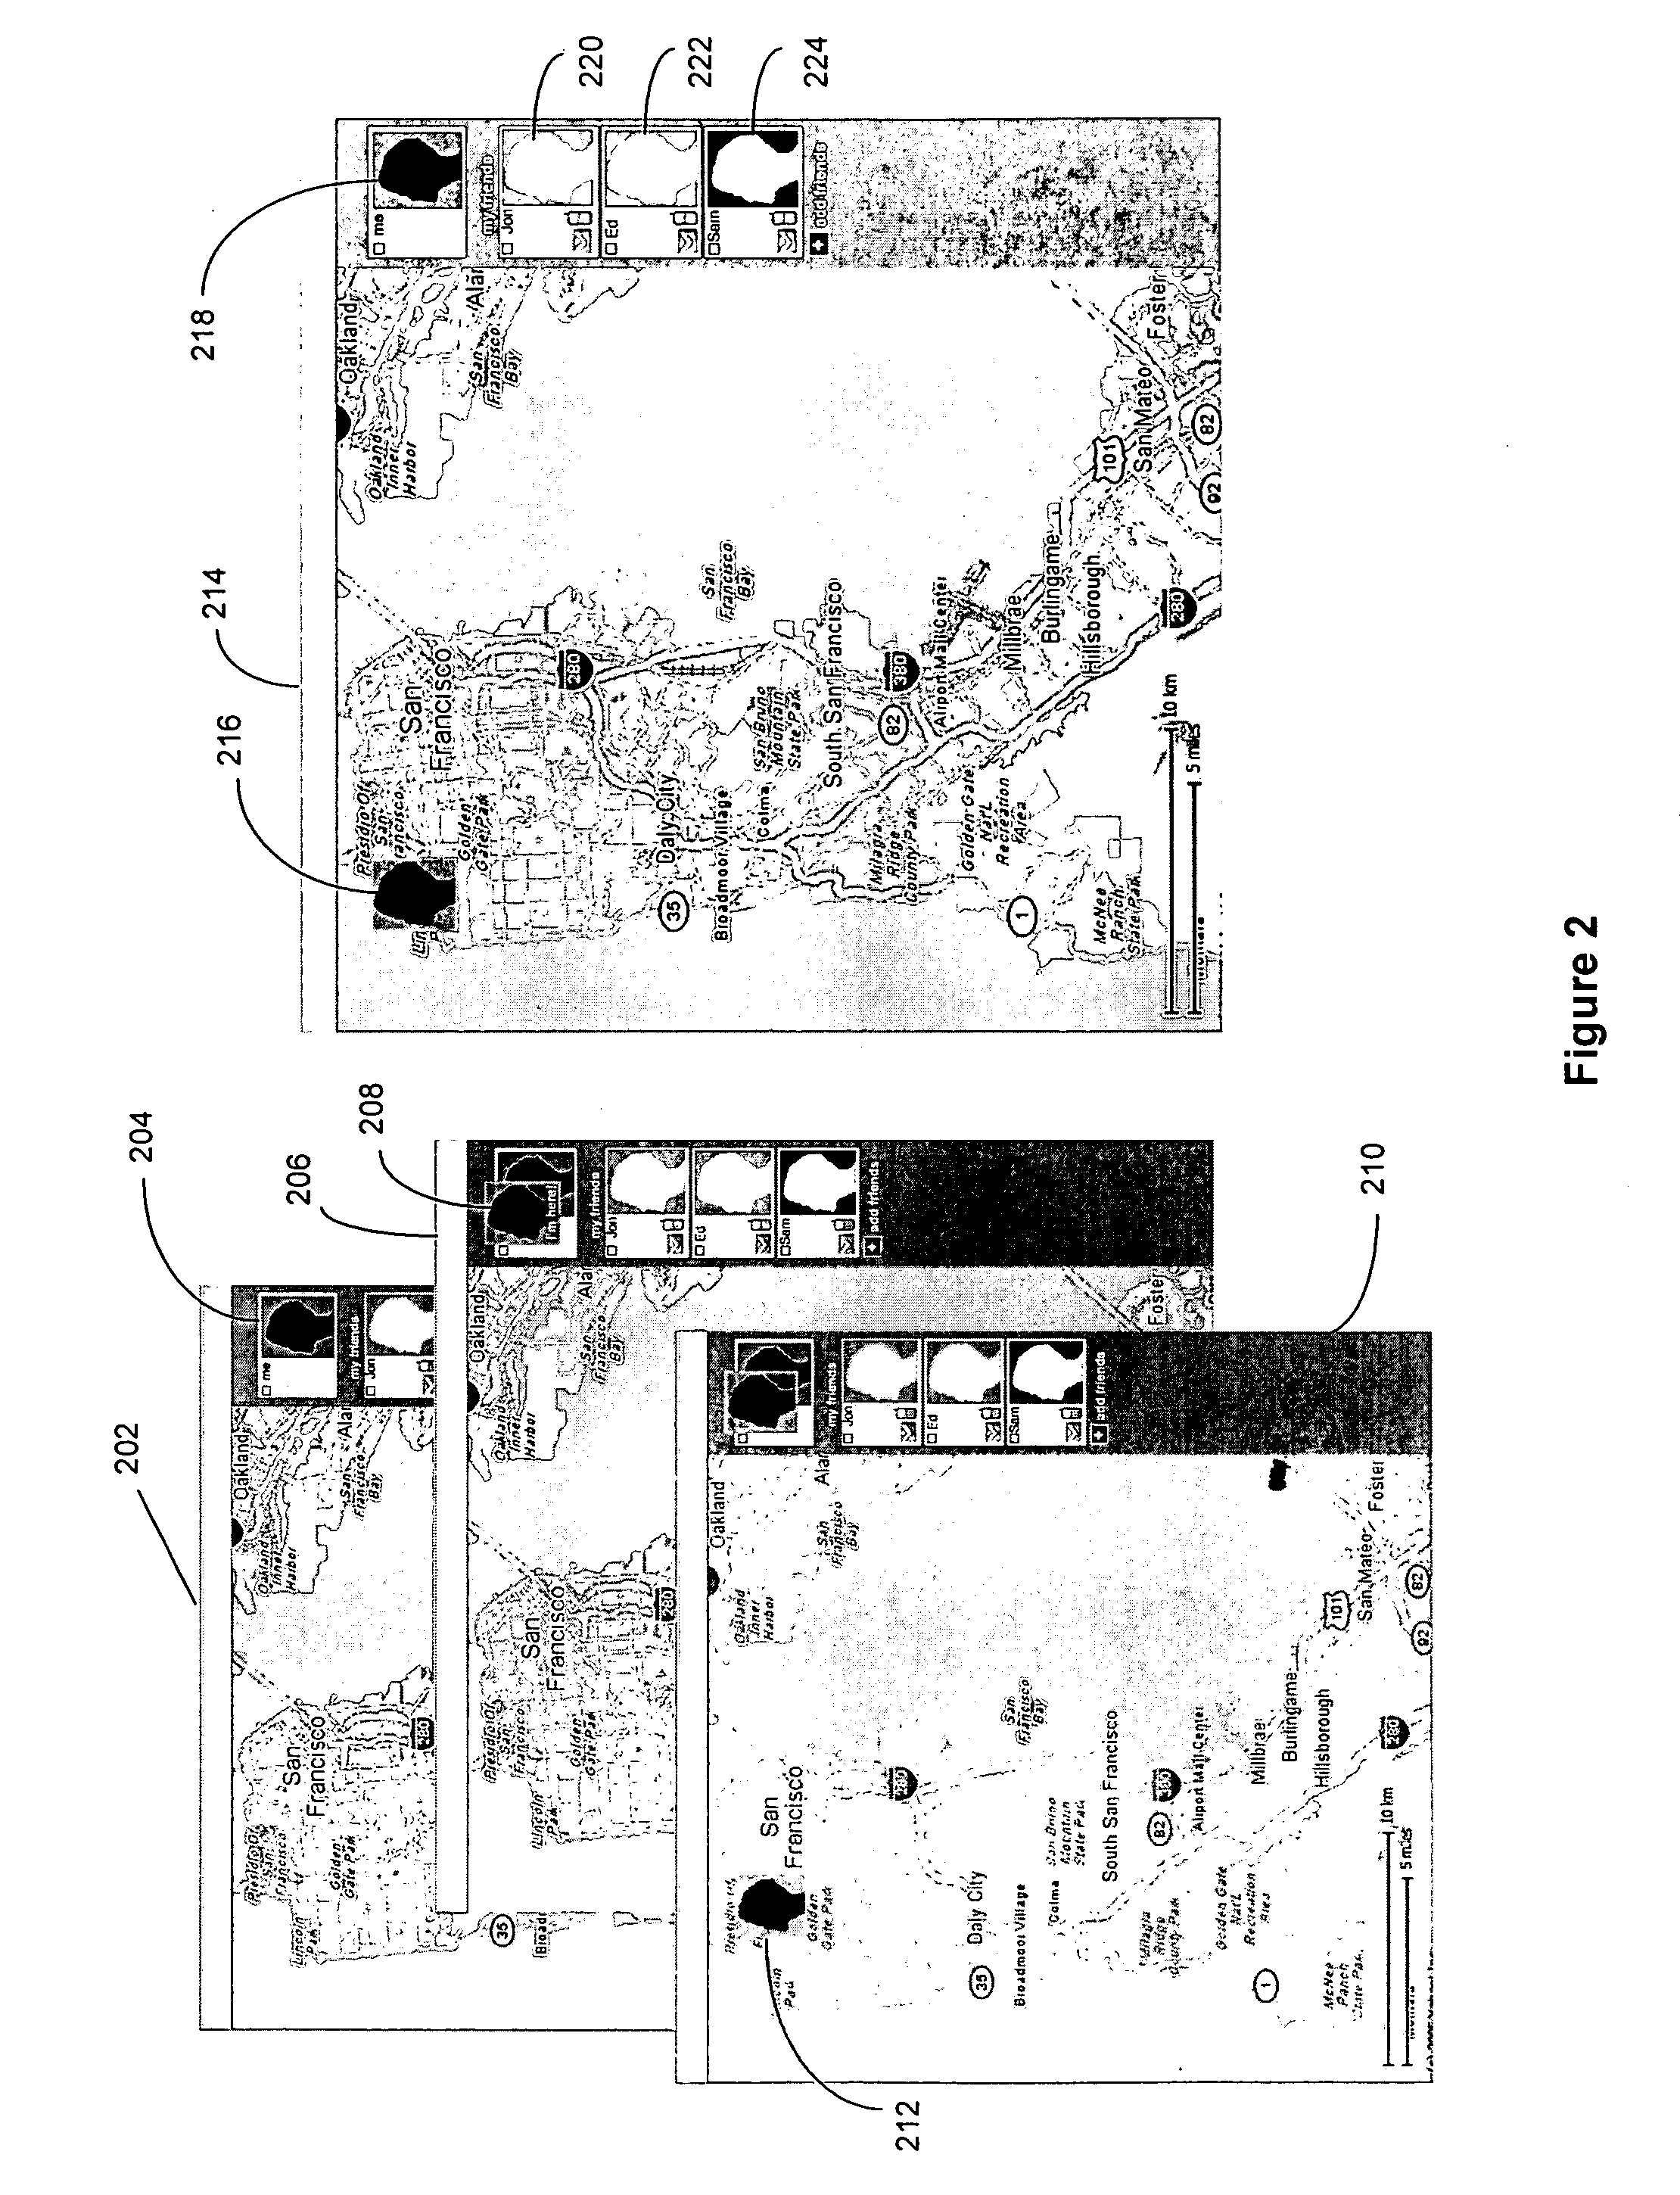 Method and system for communicating with multiple users via a map over the internet